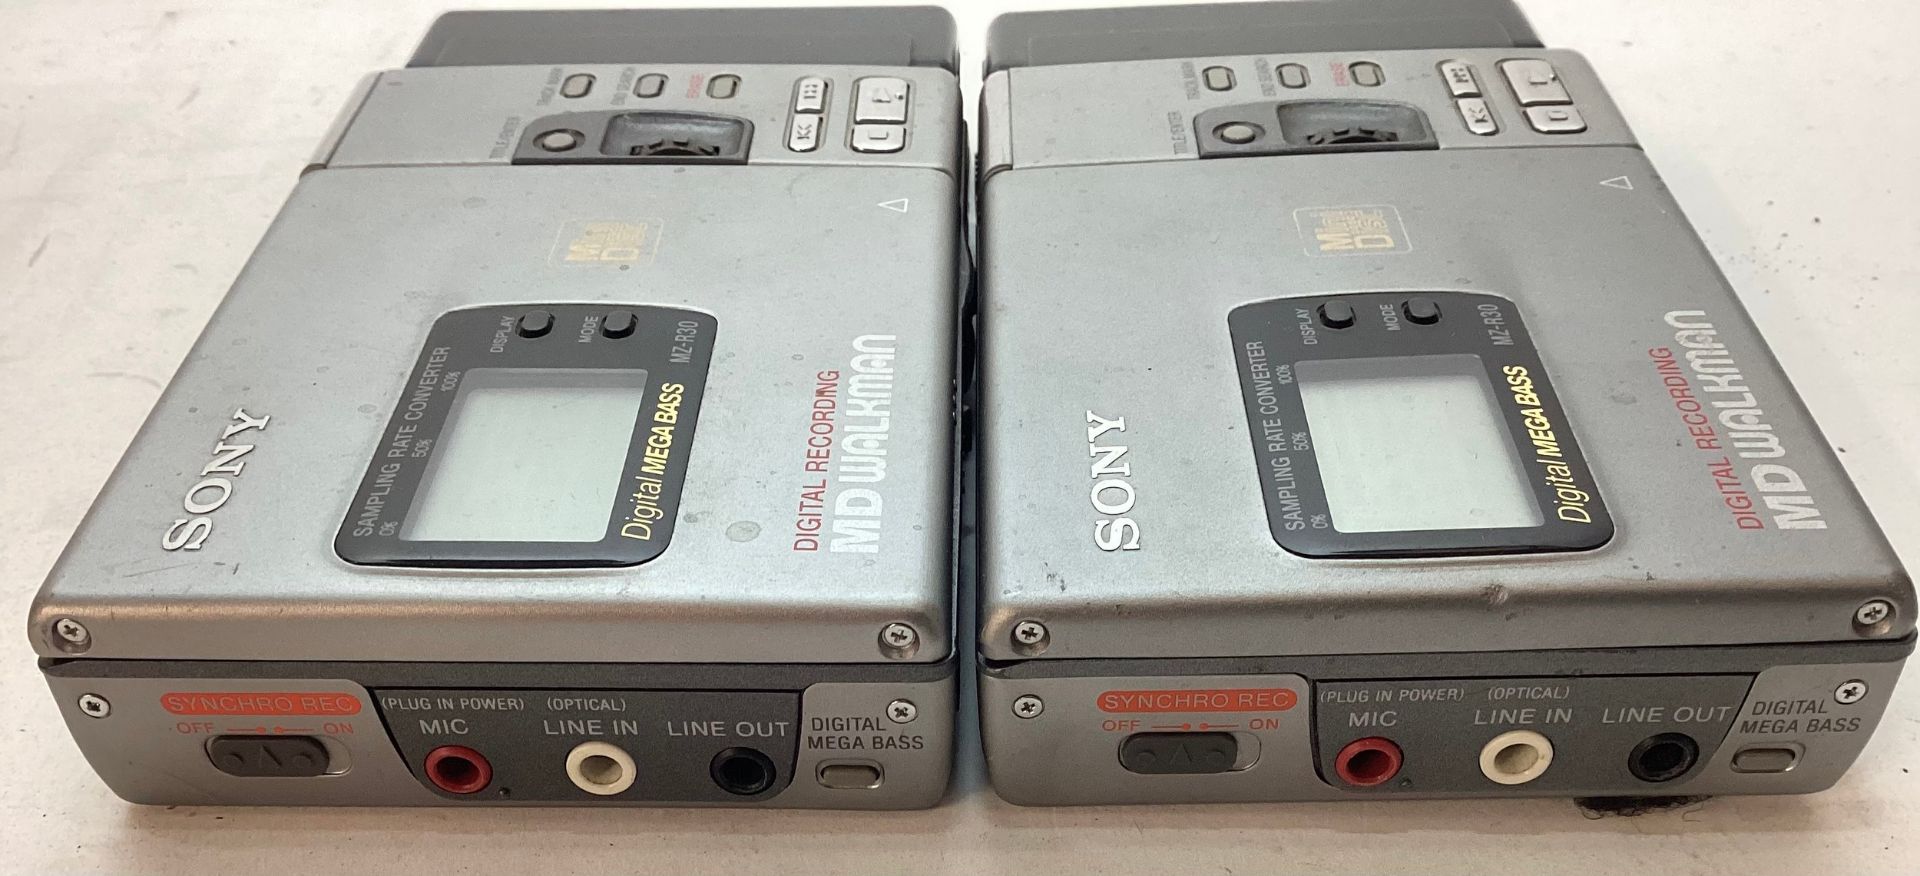 SONY MINI-DISC PLAYERS X 2. These are digital minidisc players/ recorders. They are model No. MZ- - Image 3 of 4